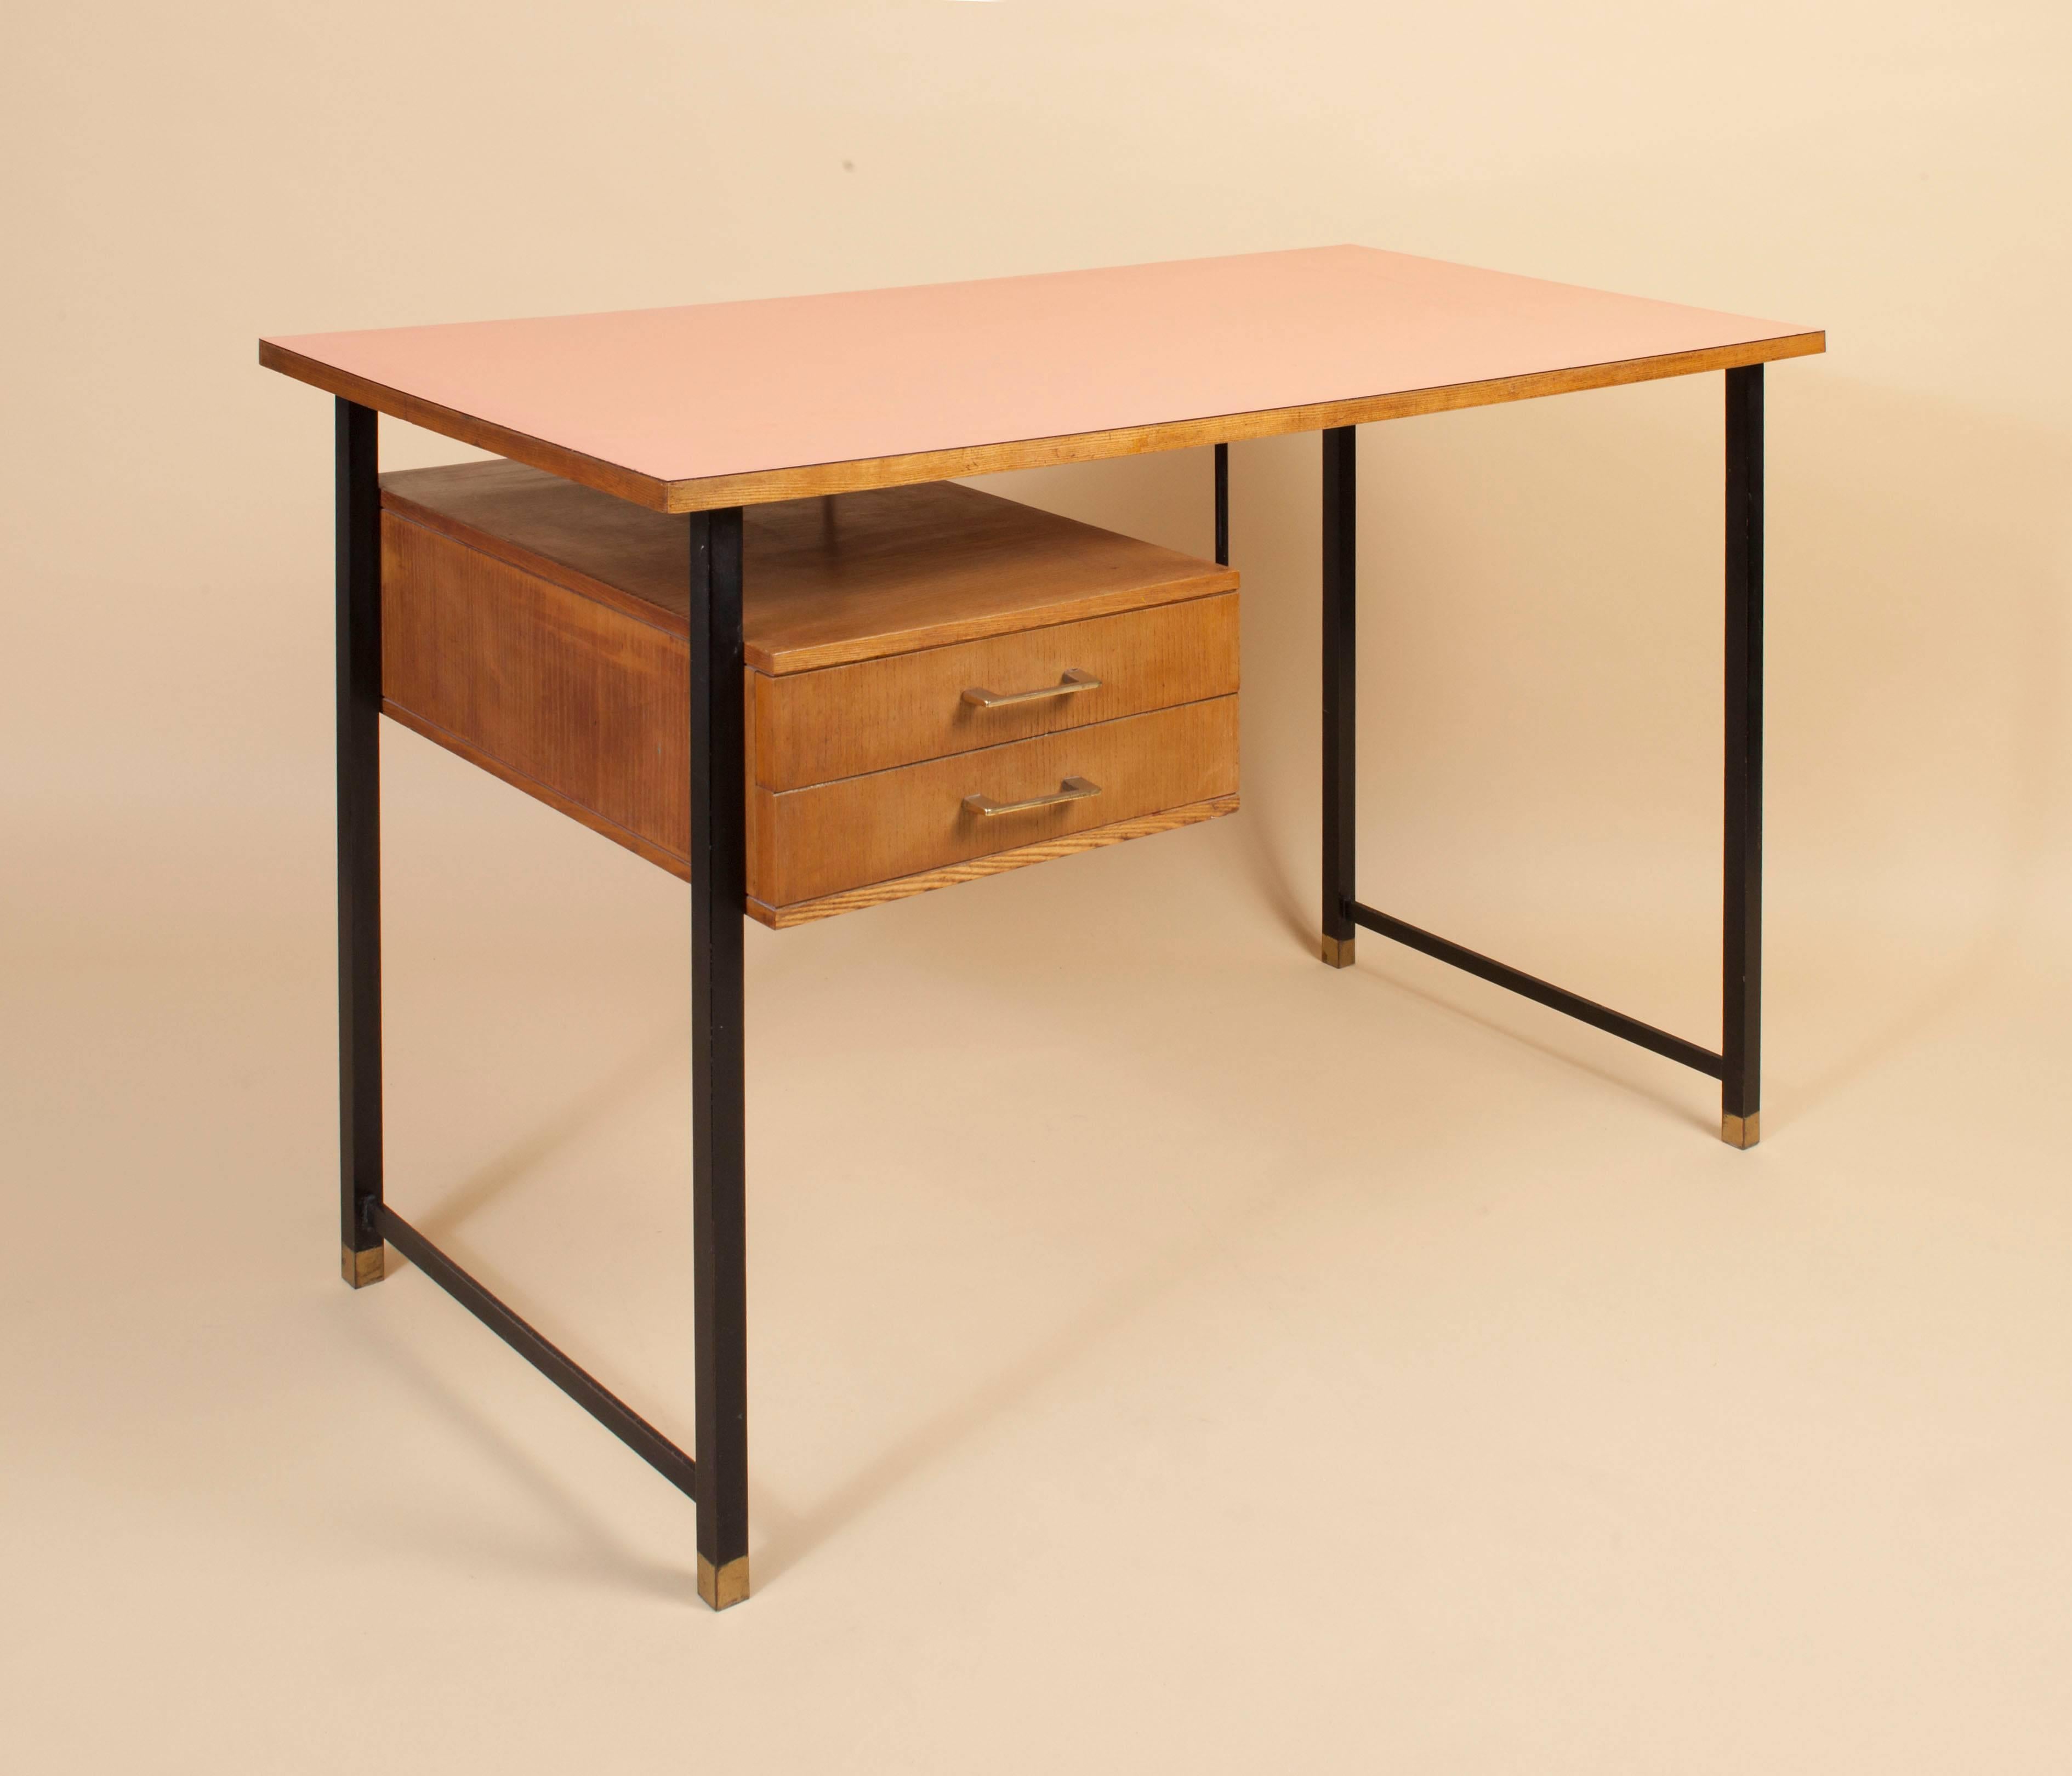 20th century, Italian desk 1960s with floating drawers made of iron, brass, formica and ash tree. With an extension made of ash tree. The formica desk top is in peach color.